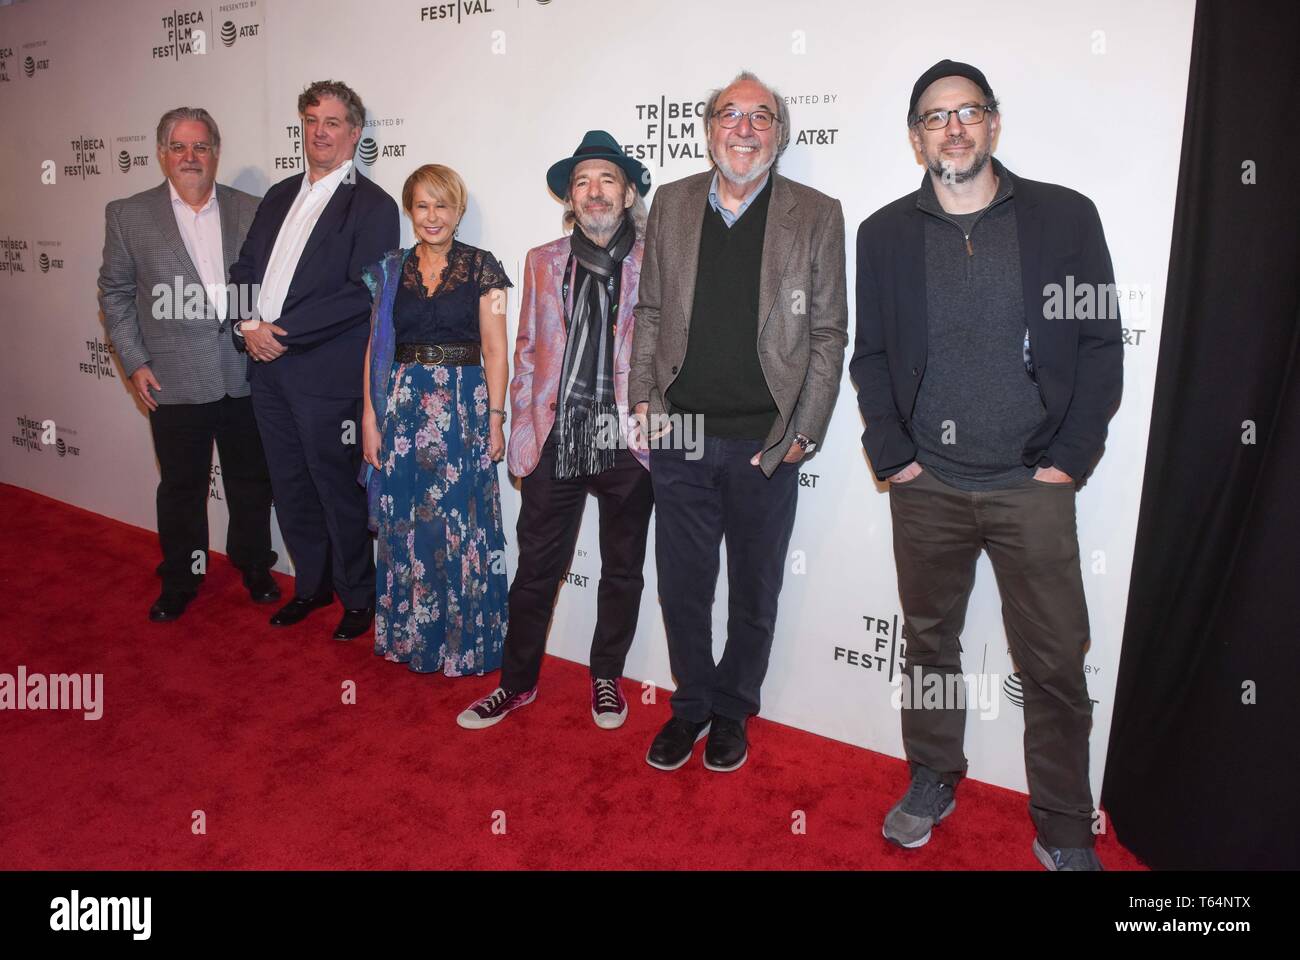 New York, New York, USA. 28th Apr, 2019. Matt Groening, Al Jean, Yeardley Smith, Harry Shearer, James L. Brooks and Matt Selman attend ‘The Simpsons 30th Anniversary' during the 2019 Tribeca Film Festival at The Stella Artois Theatre Credit: Bmcc Tpac On April 28, 2019 In New York City. Photo: Jeremy Smith/Image Space/Media Punch/Alamy Live News Stock Photo